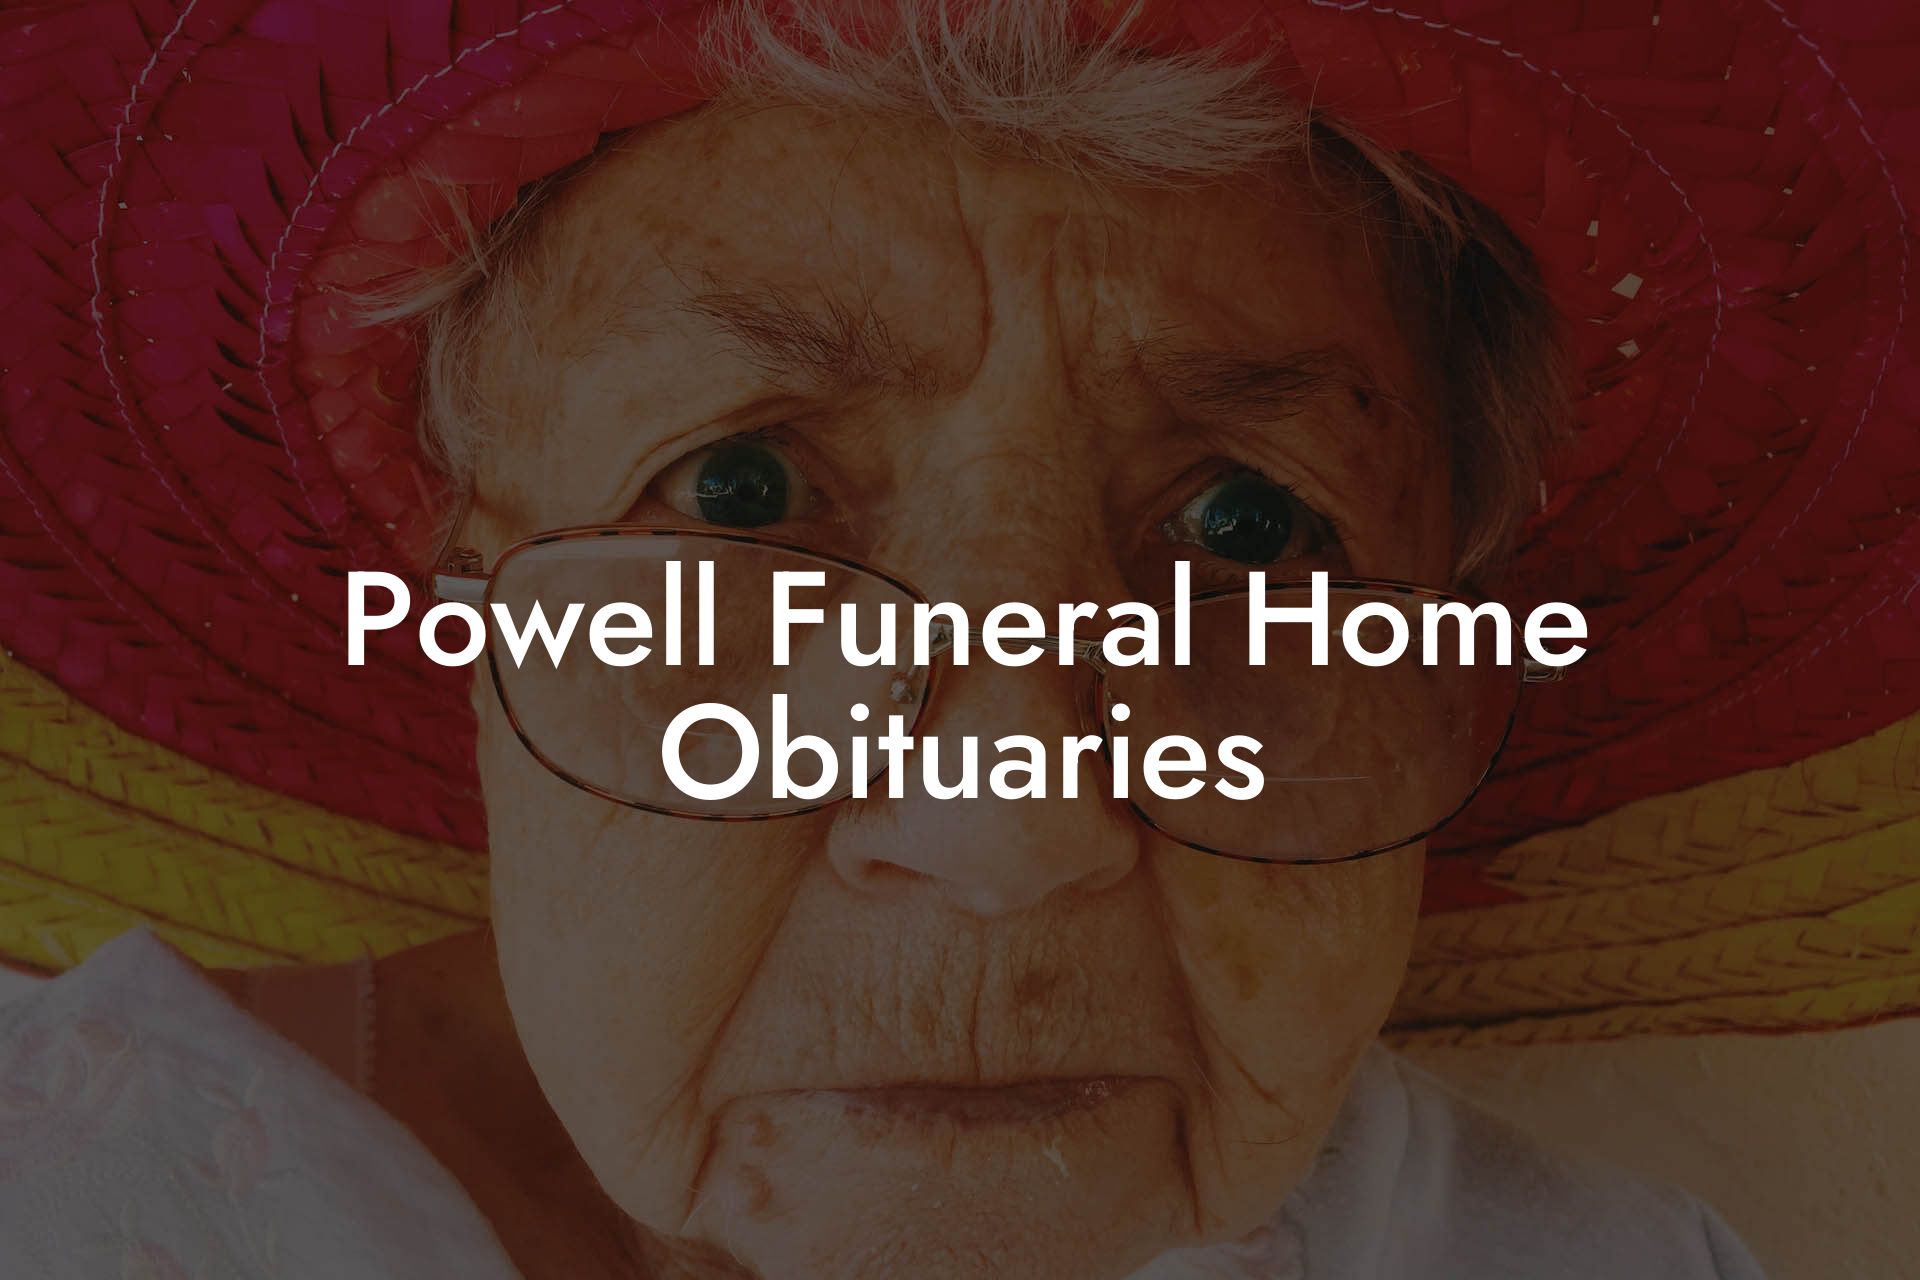 Powell Funeral Home Obituaries